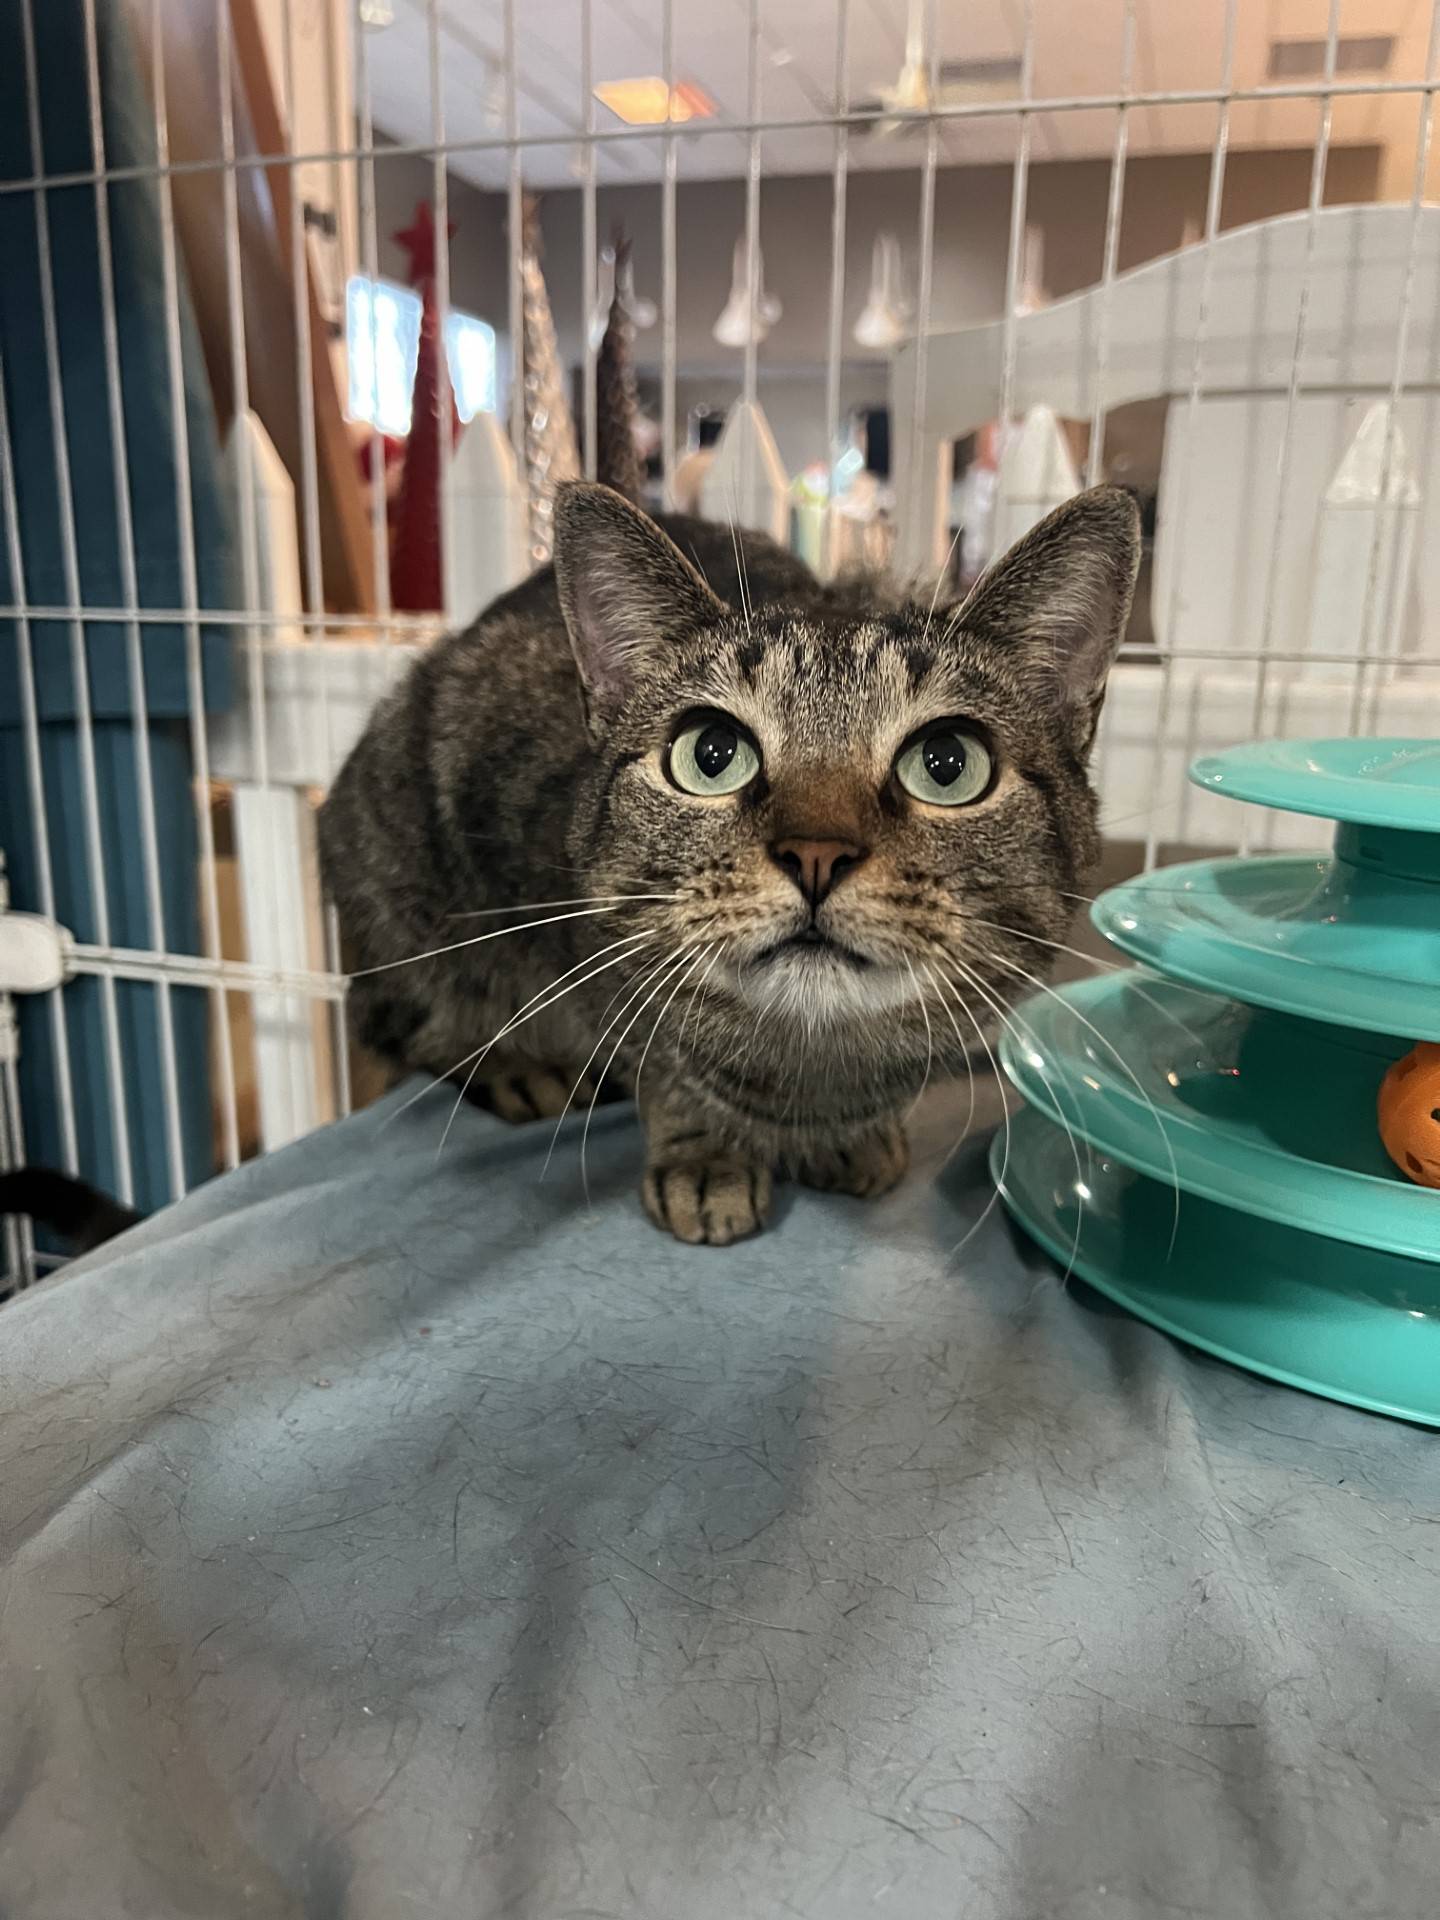 Two-year-old Miss Penny was relinquished when her owners moved to a place that did not allow pets.  She is quiet, gentle and sweet. She warms up when petted and given attention. She needs to be in a home where she feels safe and cherished. To meet Miss Penny, email Catadoptions@nawsus.org. Visit nawsus.org.